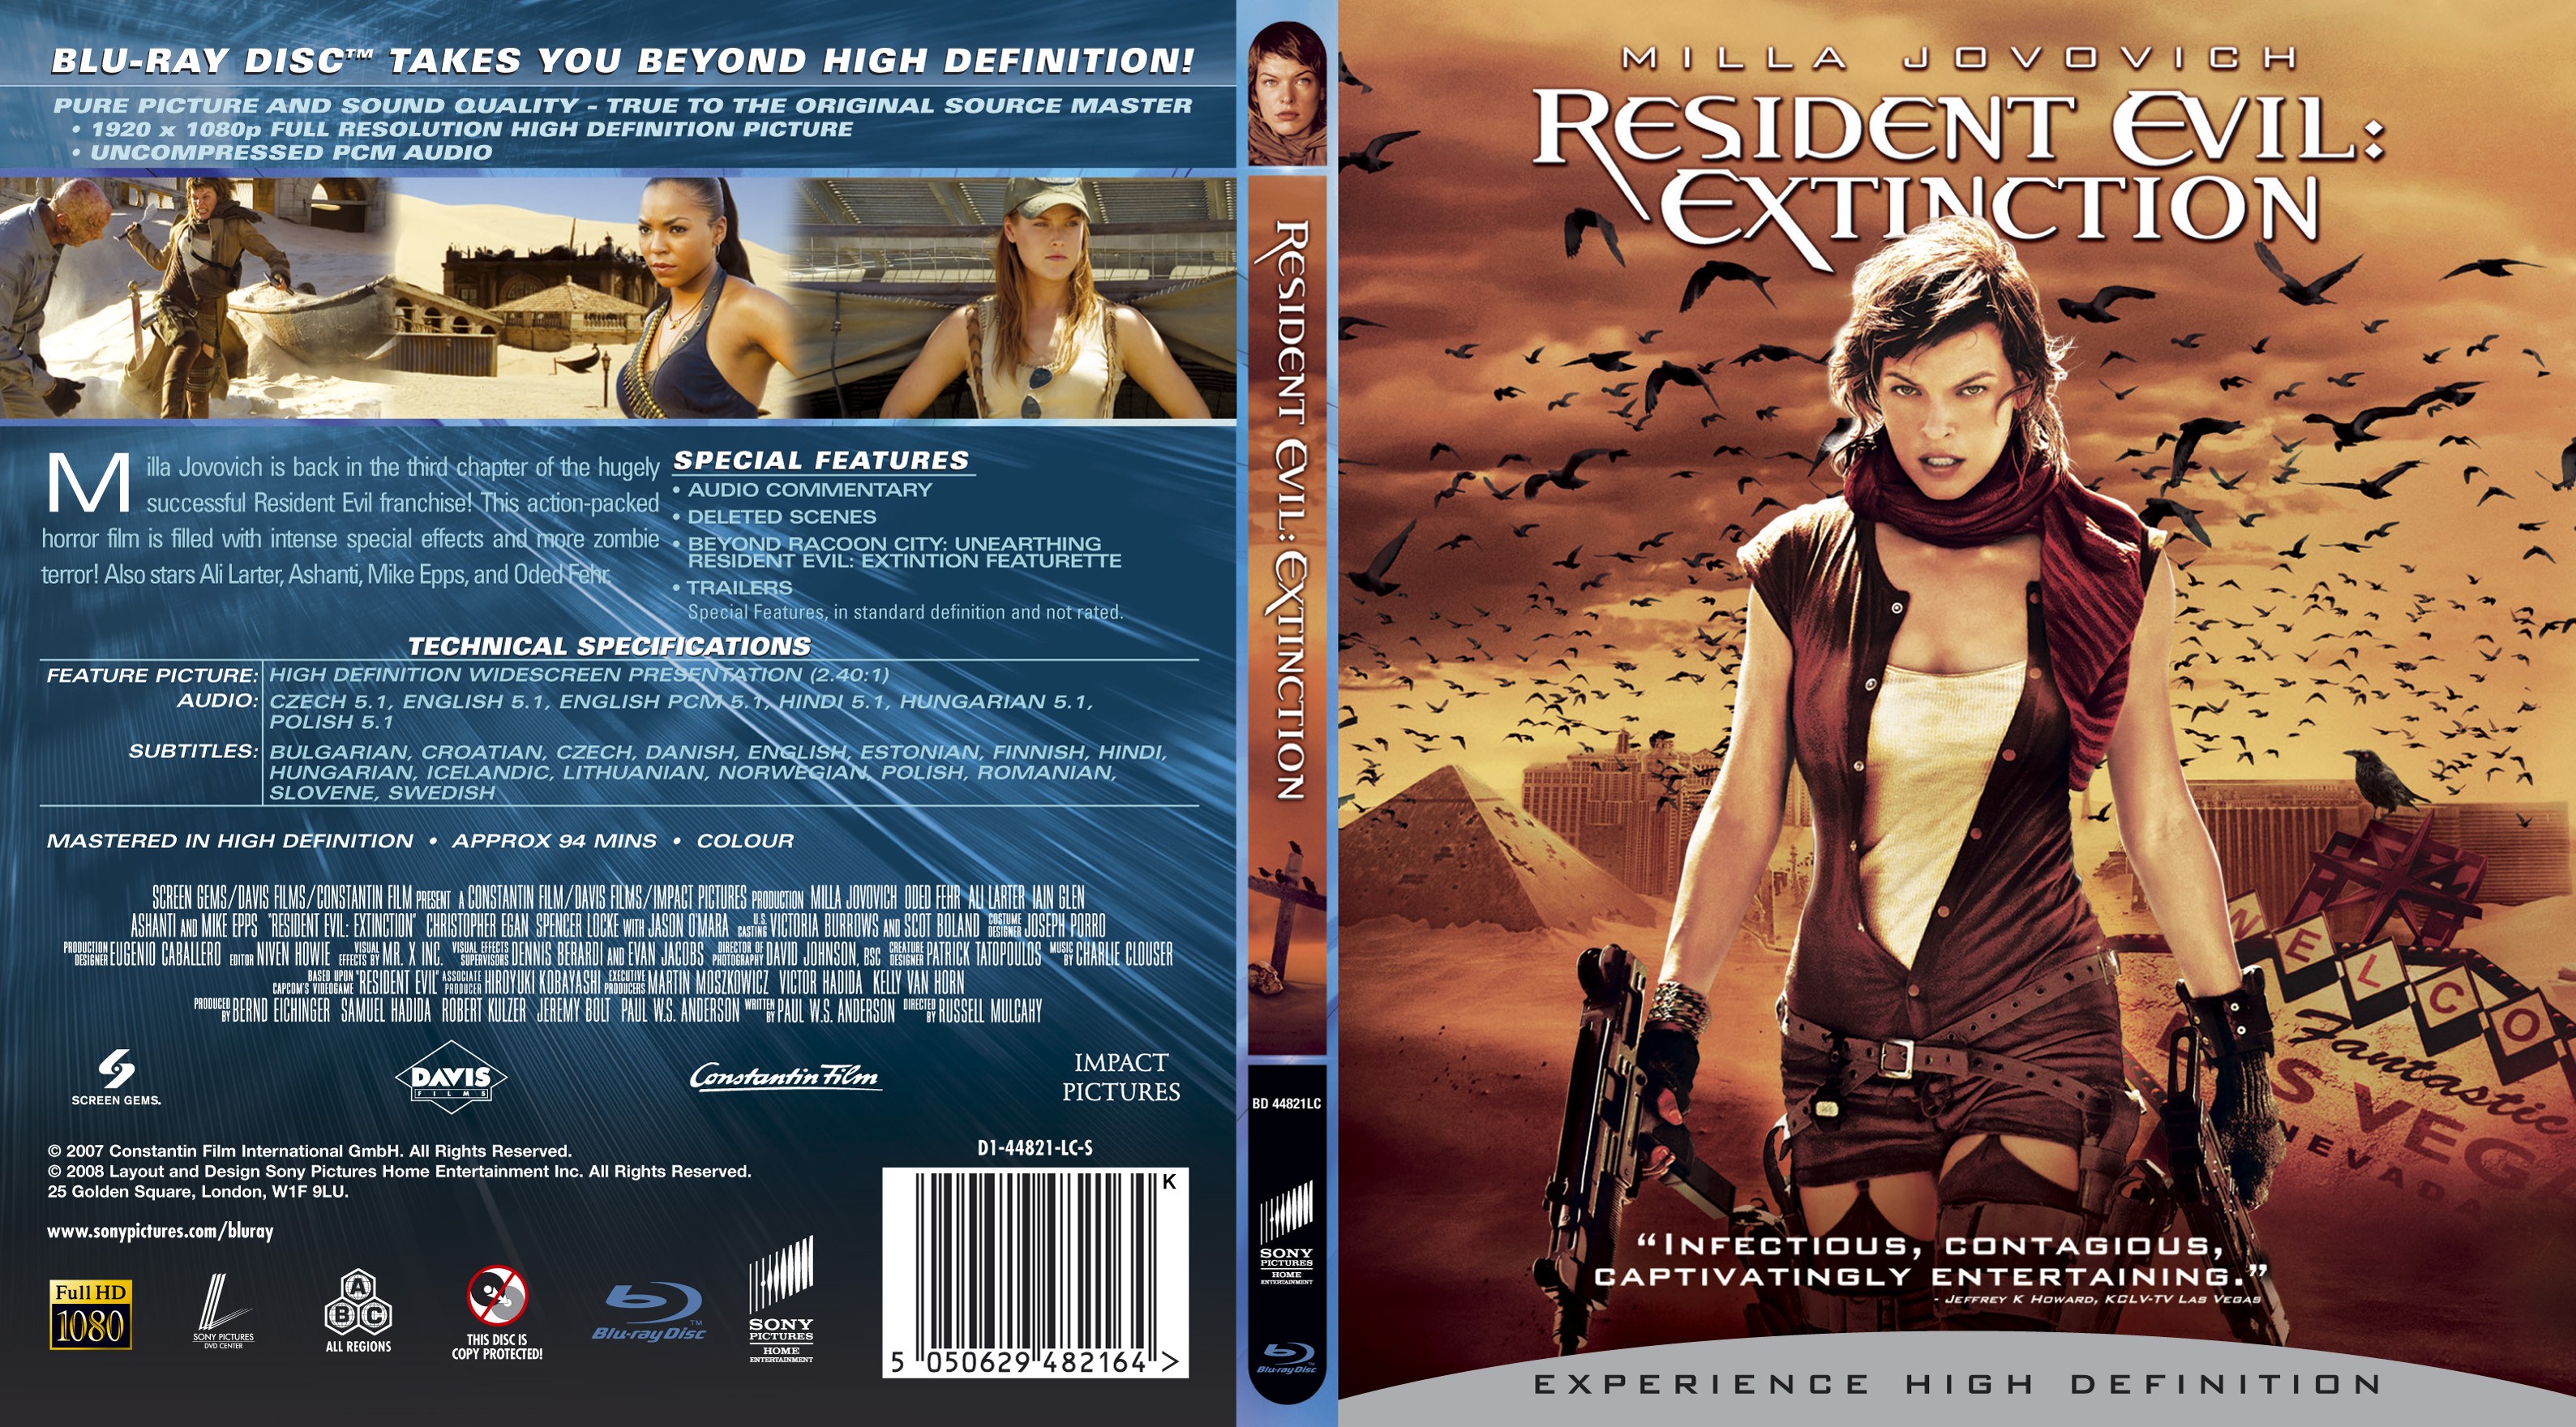 Jaquette DVD Resident evil extinction Zone 1 (BLU-RAY)